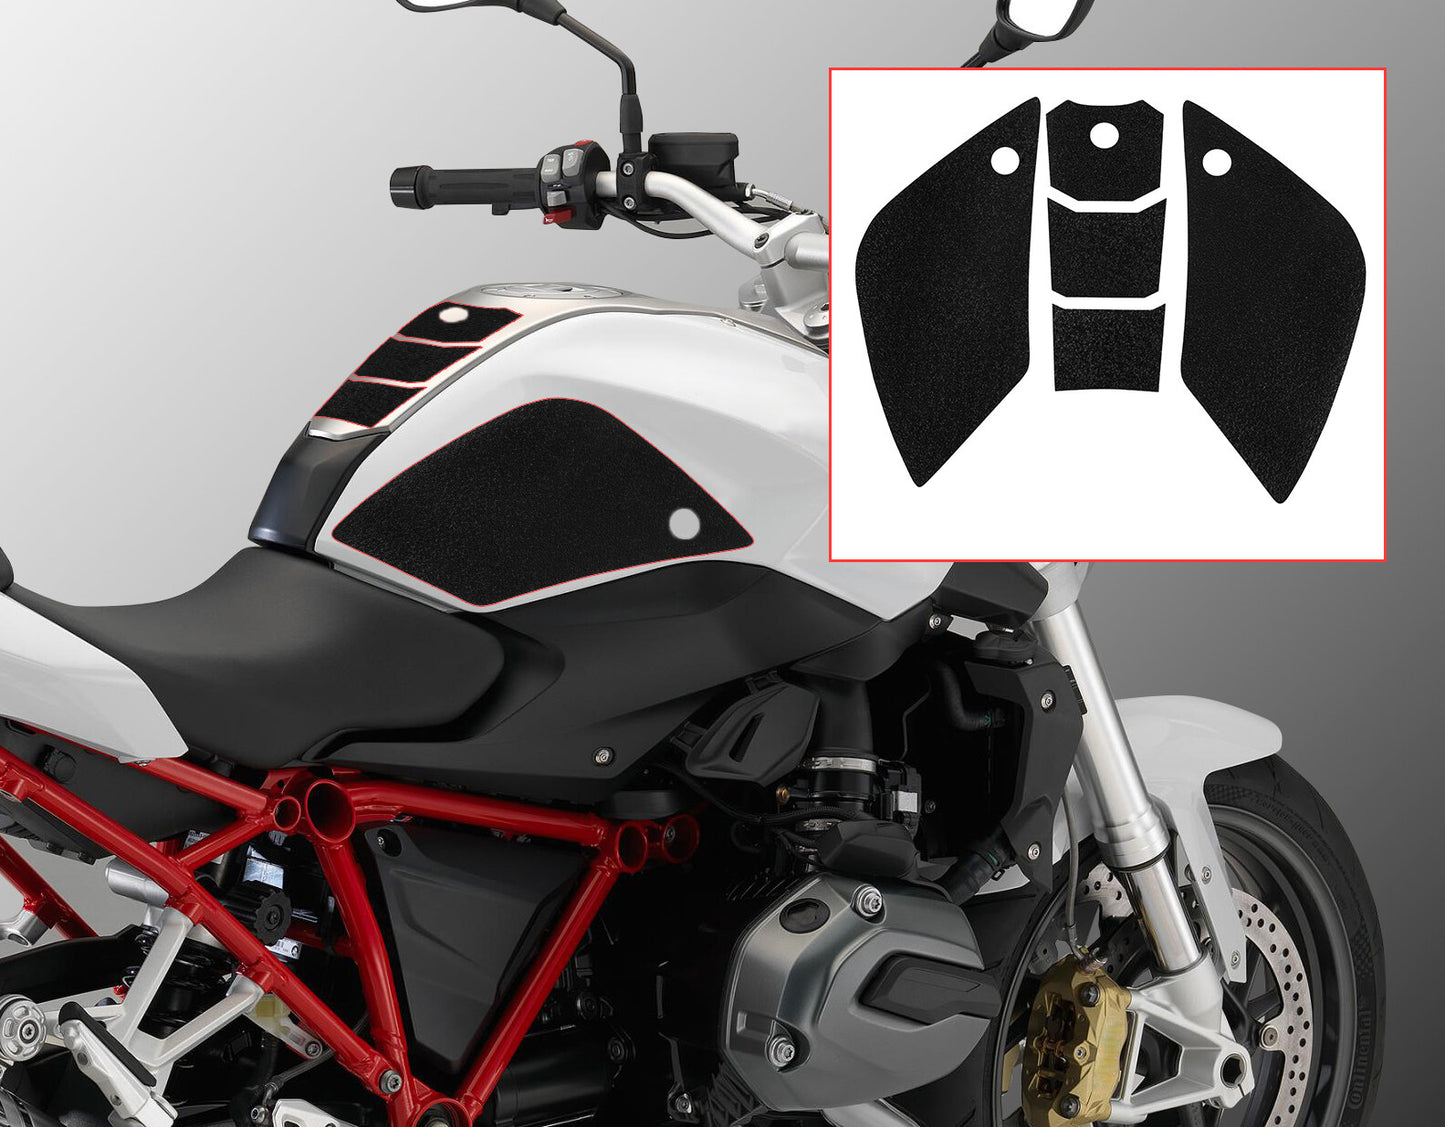 Wolfline Motorcycle Anti Slip Tank Pad Stickers Side Gas Tank Pad Knee Grip Decals Protection  For BMW R1200R R 1200 R 2015 2016 2017 2018 2019 2020 2021 2022